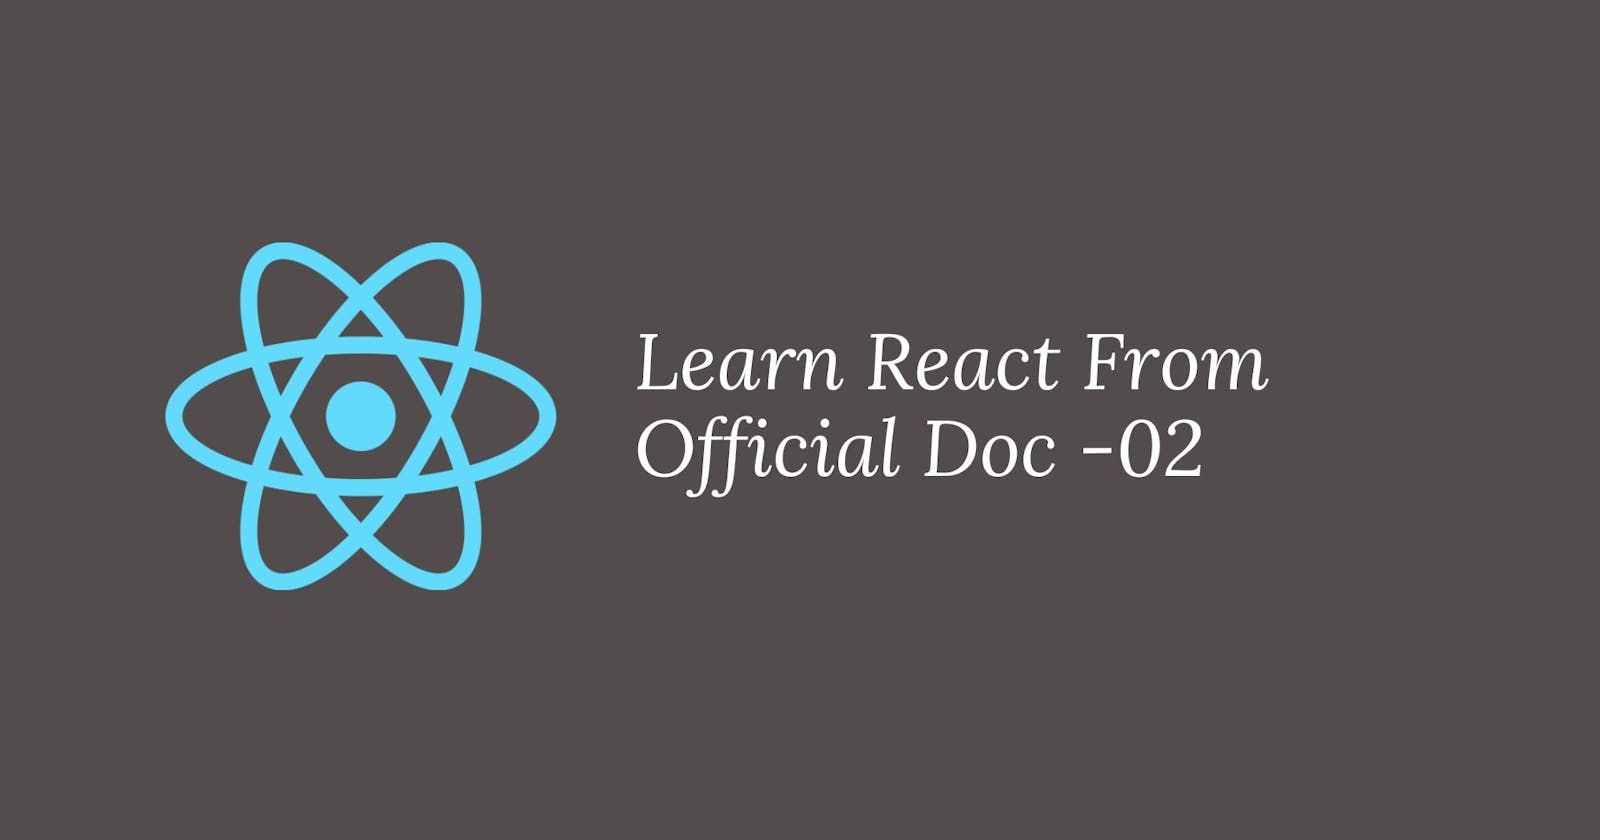 Learn React From Official Doc -02